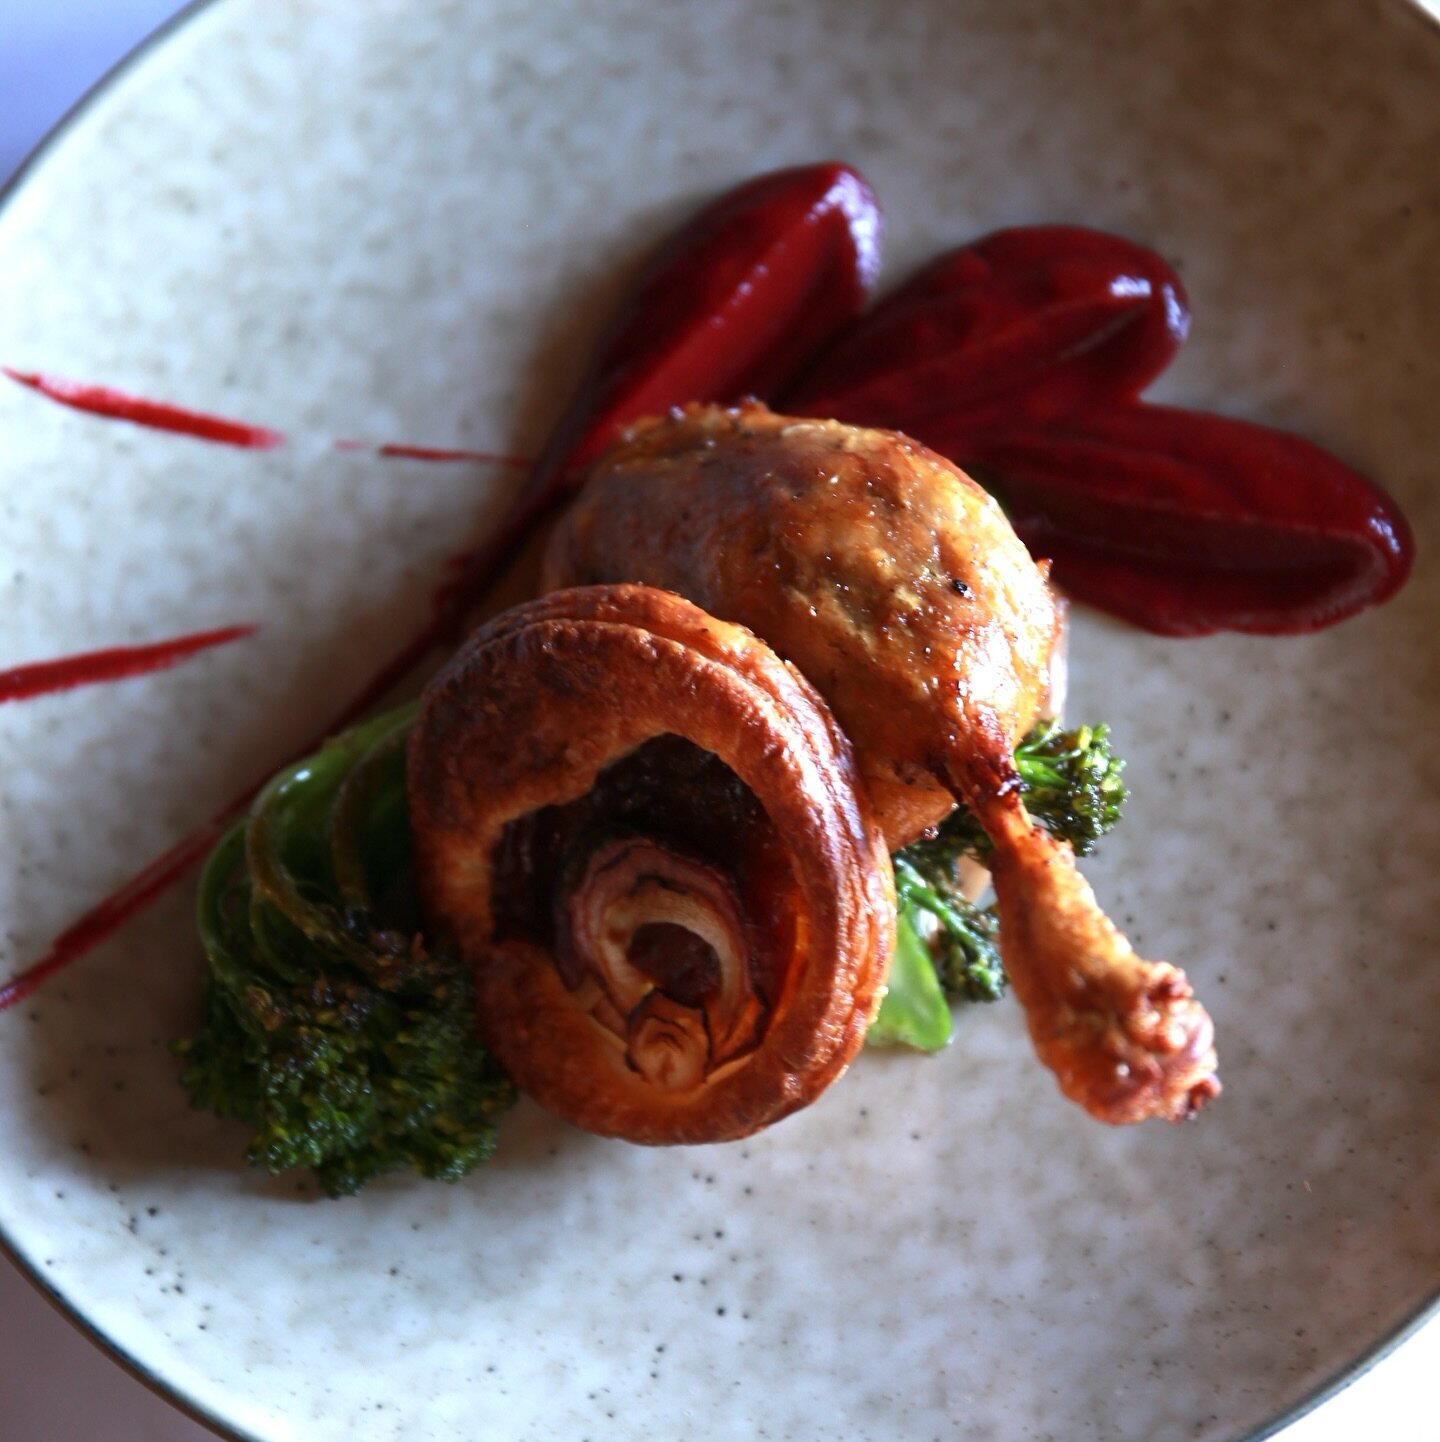 Enjoy our seasonal Autumn Menu 🍁

Tender Juniper Crusted Confit Duck Leg served with a crisp Caramelised Onion Pastry, accompanied by smooth Beetroot Puree for a touch of sweetness. 

Finished with creamy Black Pepper Cream for warmth and depth. 

T